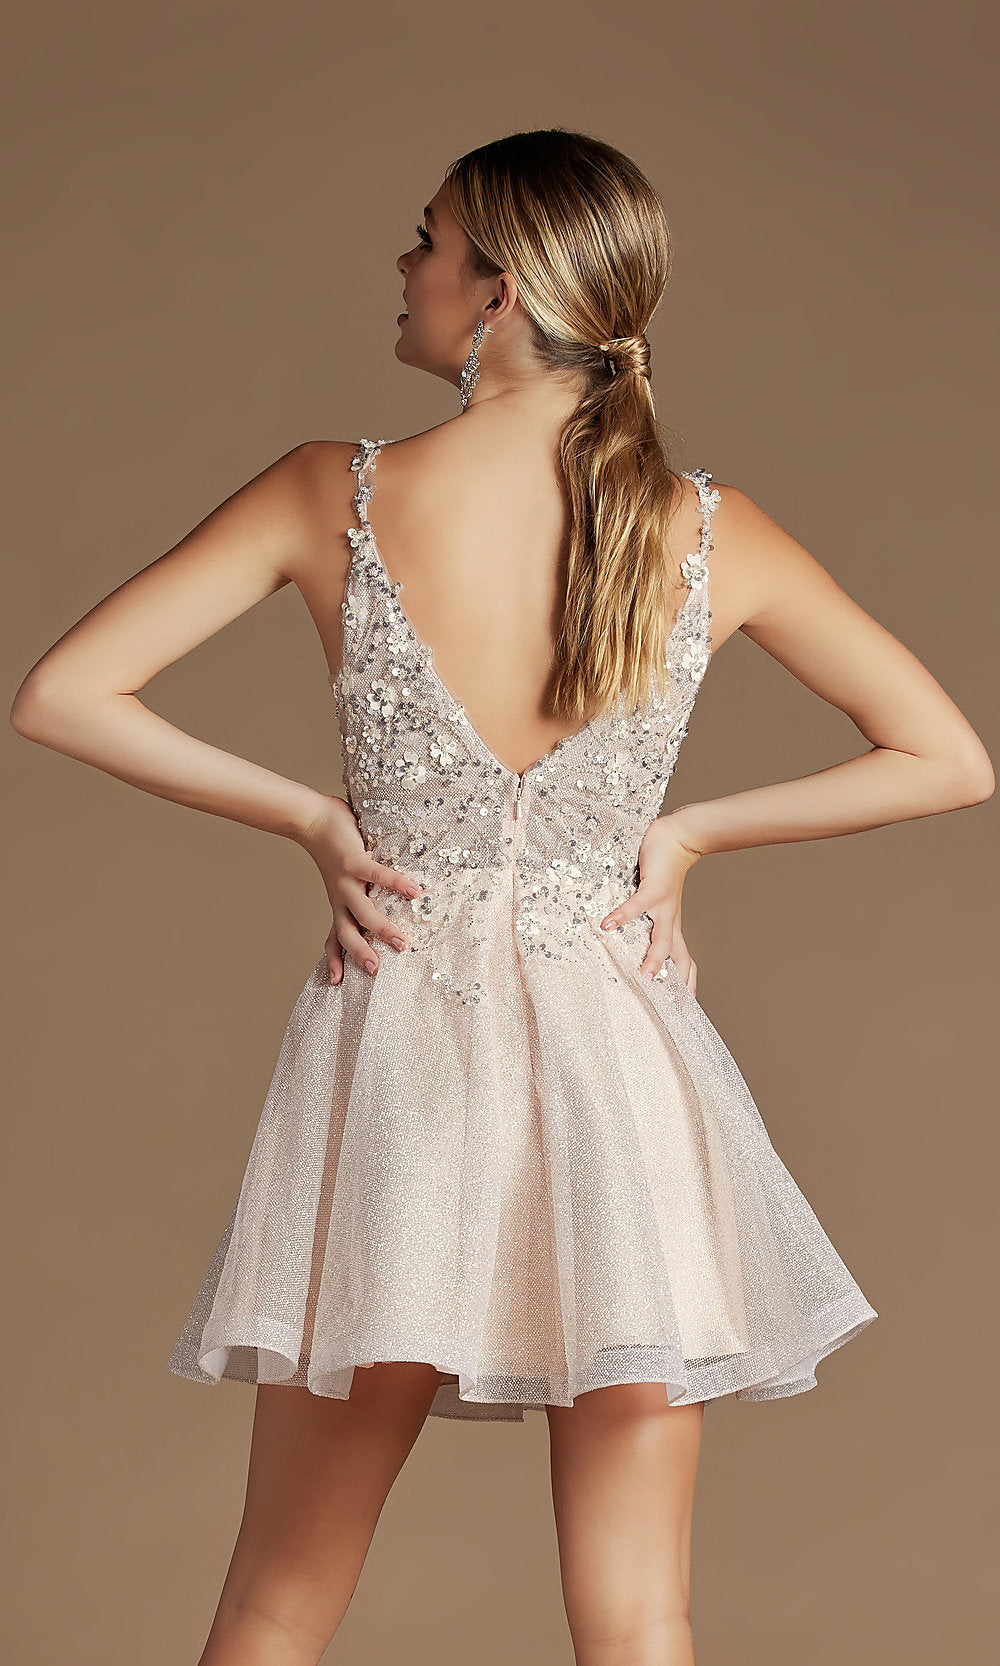  Embroidered Short Glitter Pastel Homecoming Dress